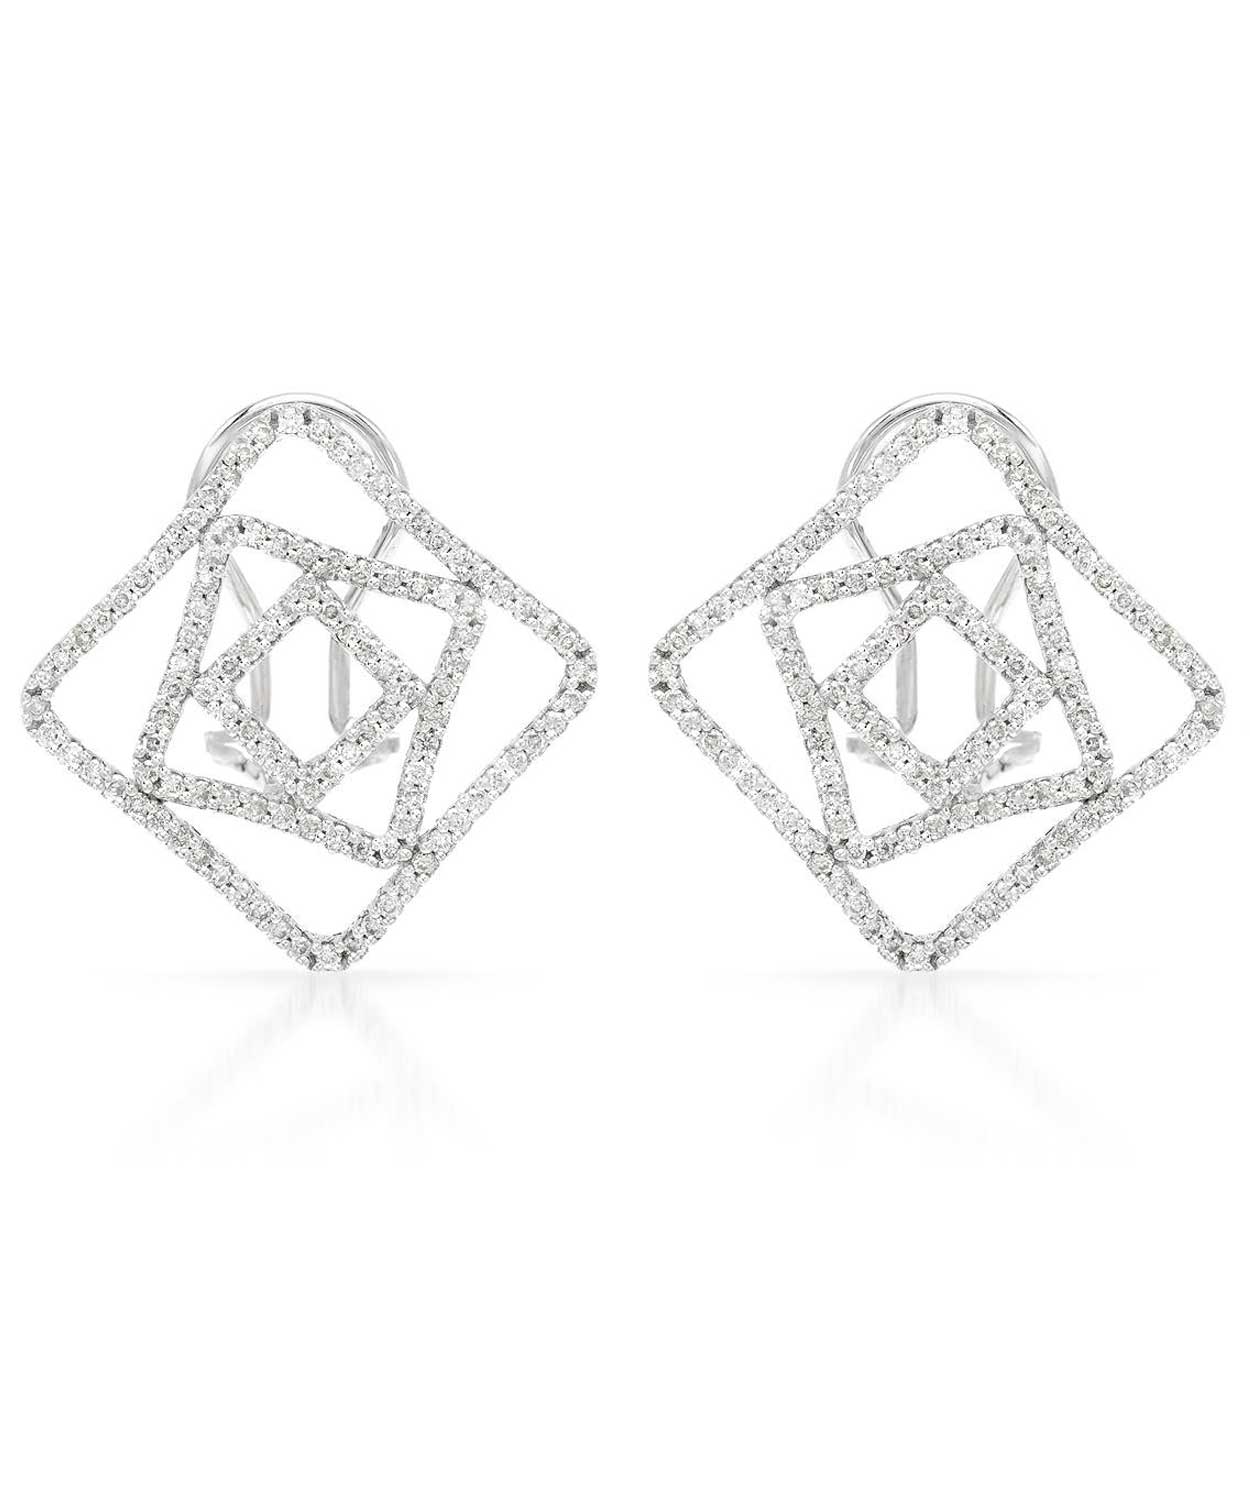 Allure Collection 0.95 ctw Diamond 14k Gold Contemporary Earrings View 1